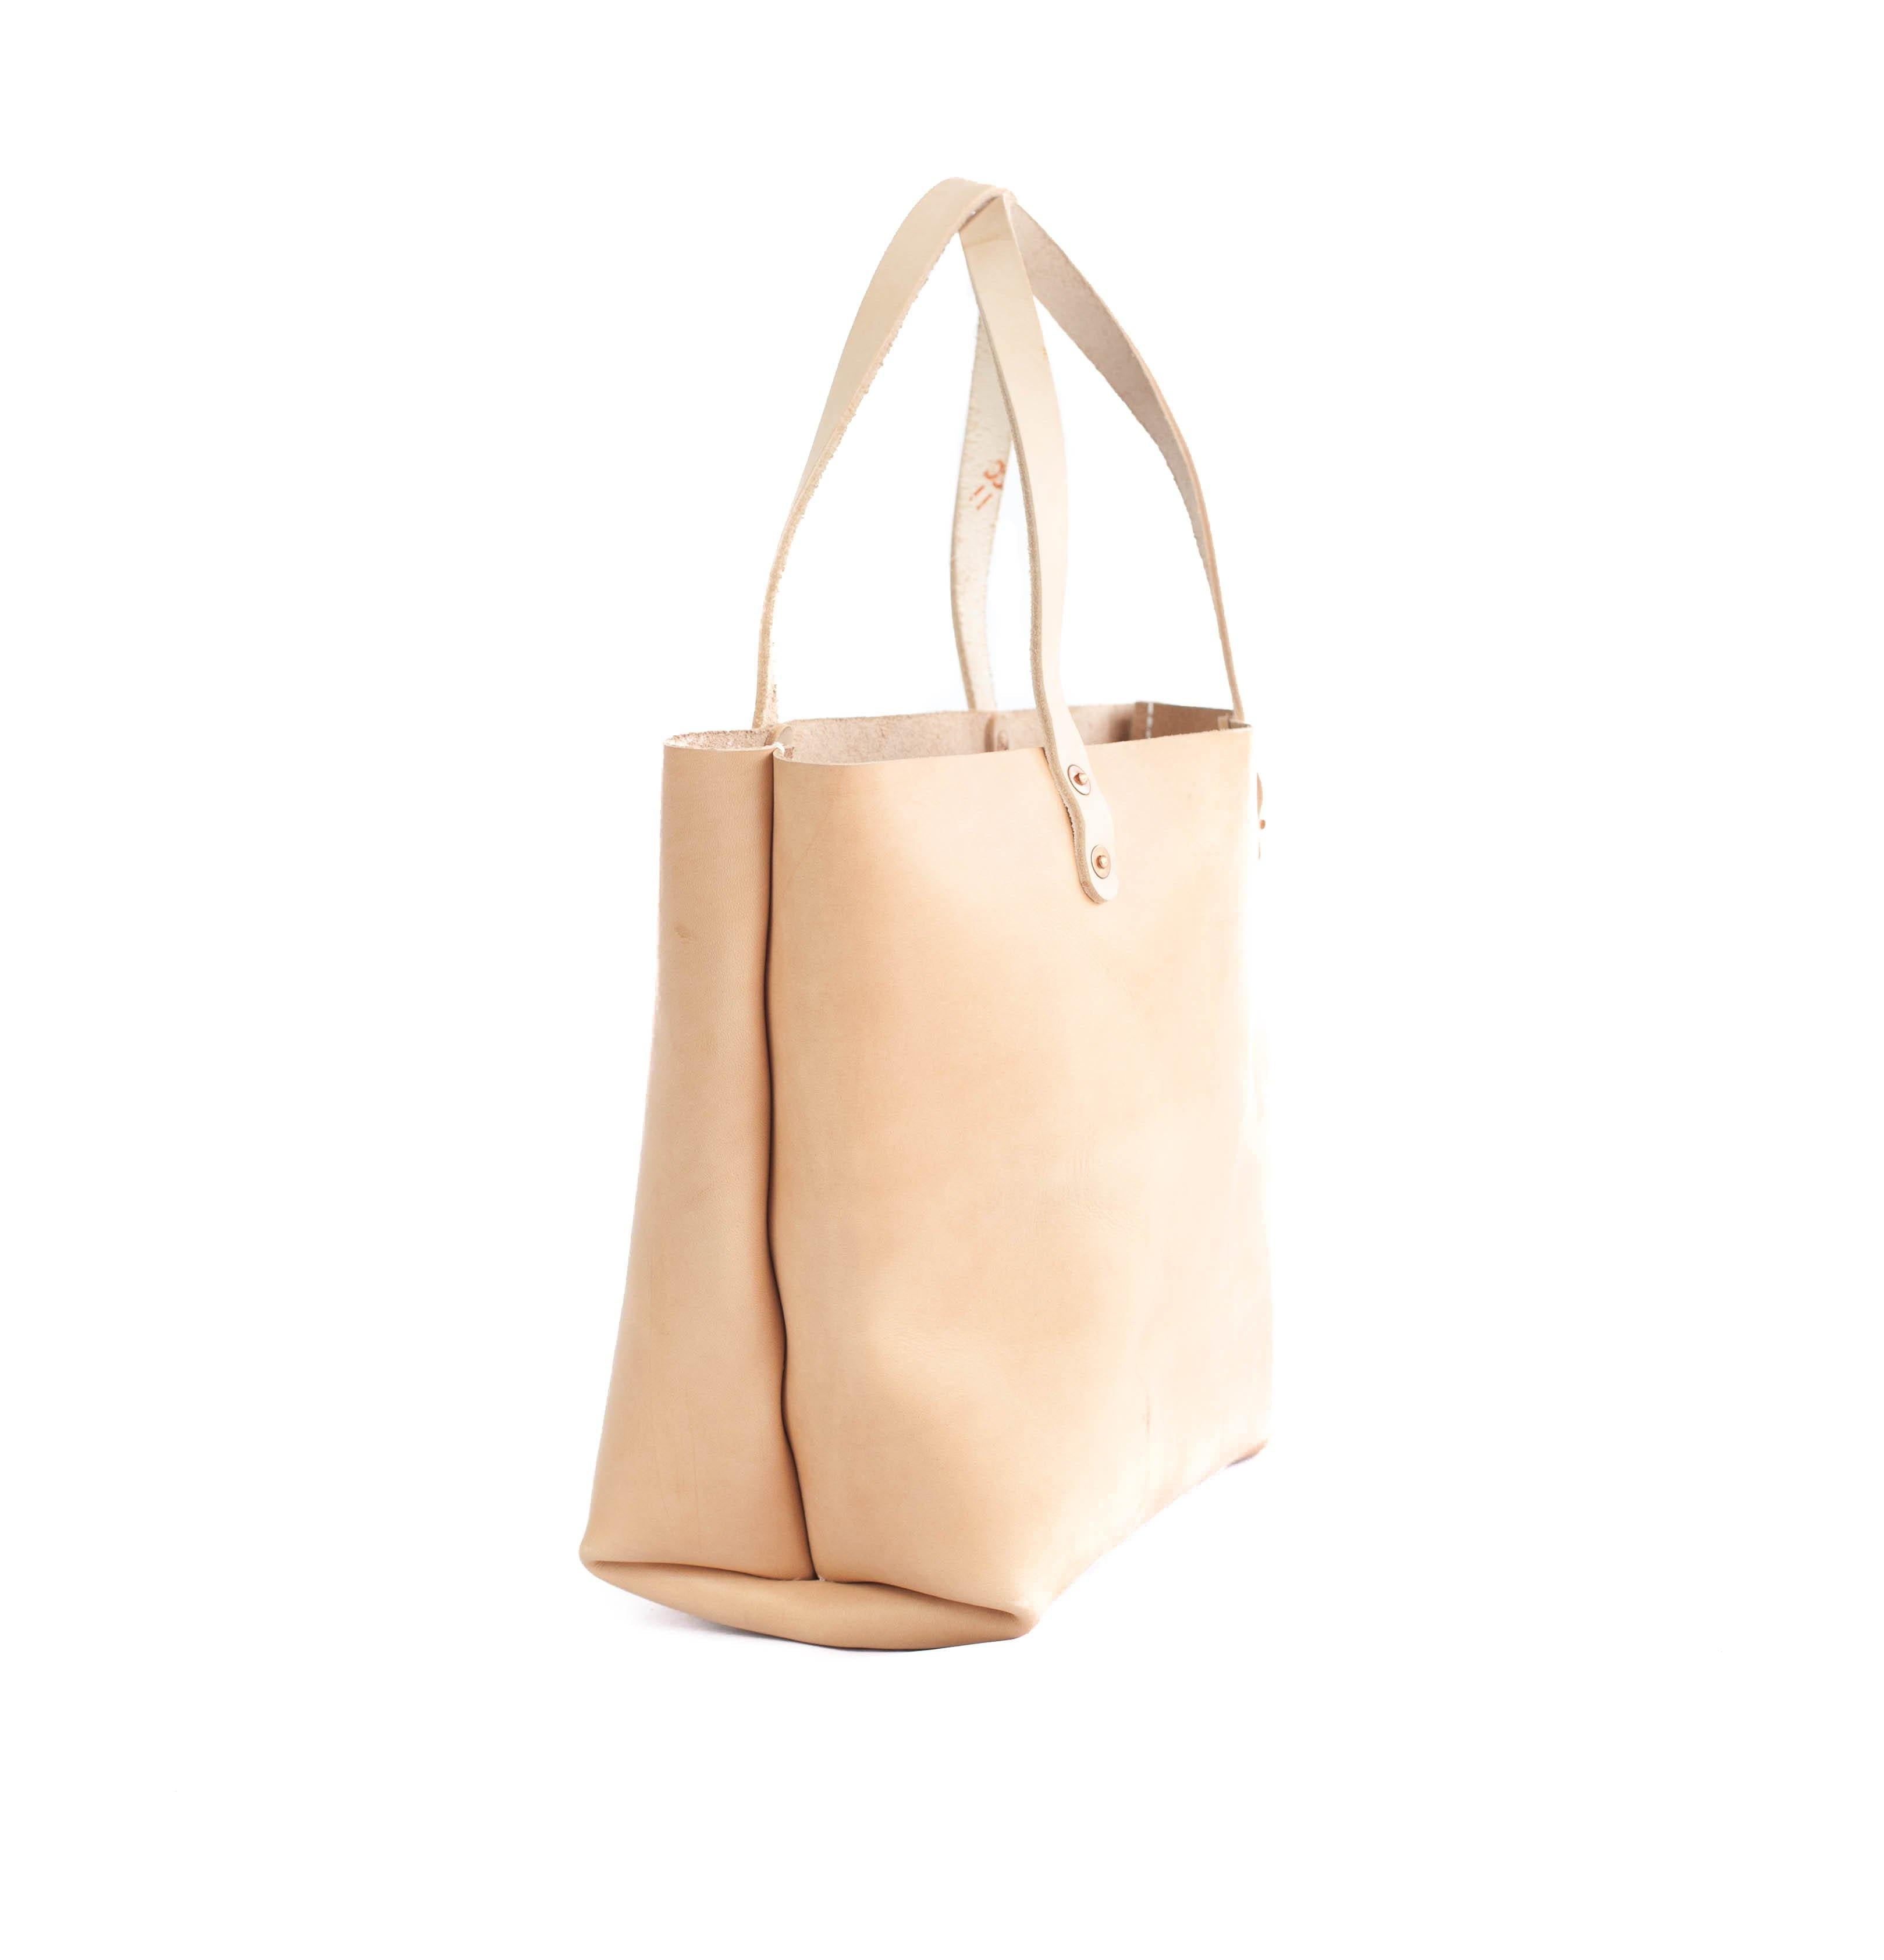 Natural Veg Tanned Leather Tote Purse